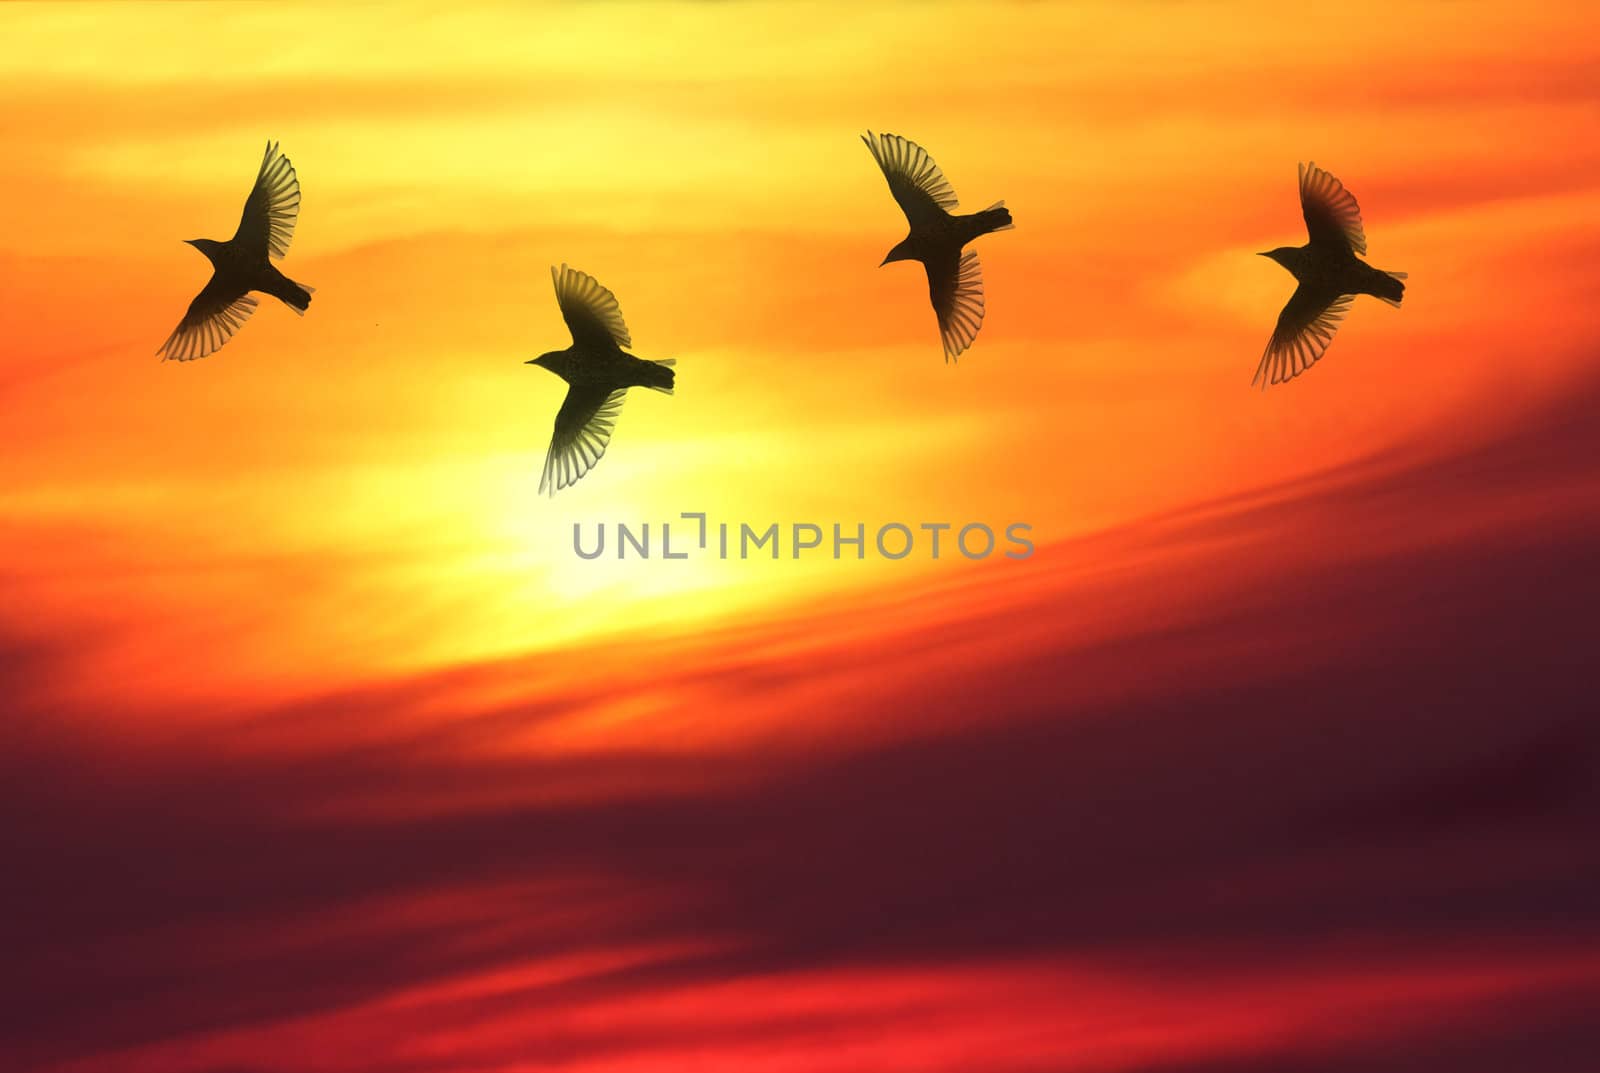 Four birds chasing each other in front of beautiful sunset.